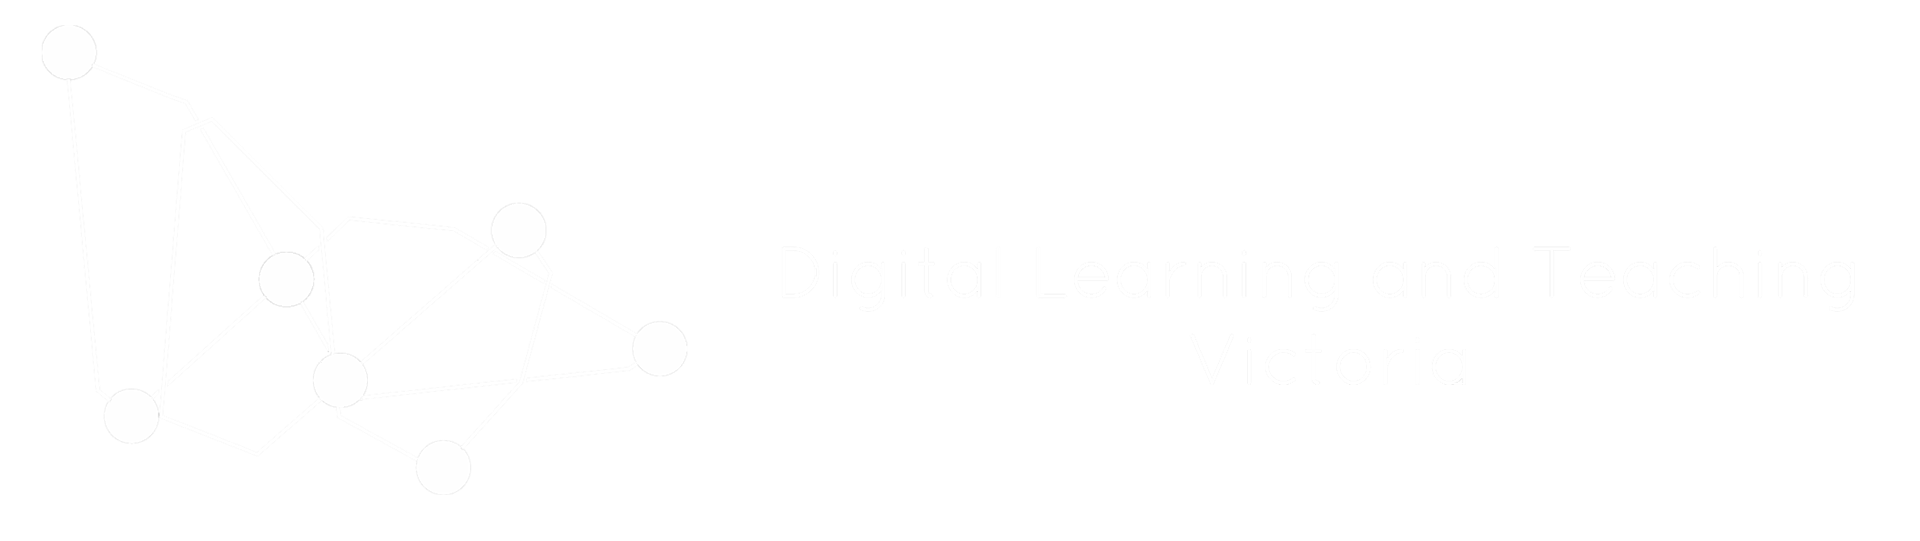 Digital Learning And Teaching Victoria Google Classroom And Meet Remote Learning For Schools And Teachers